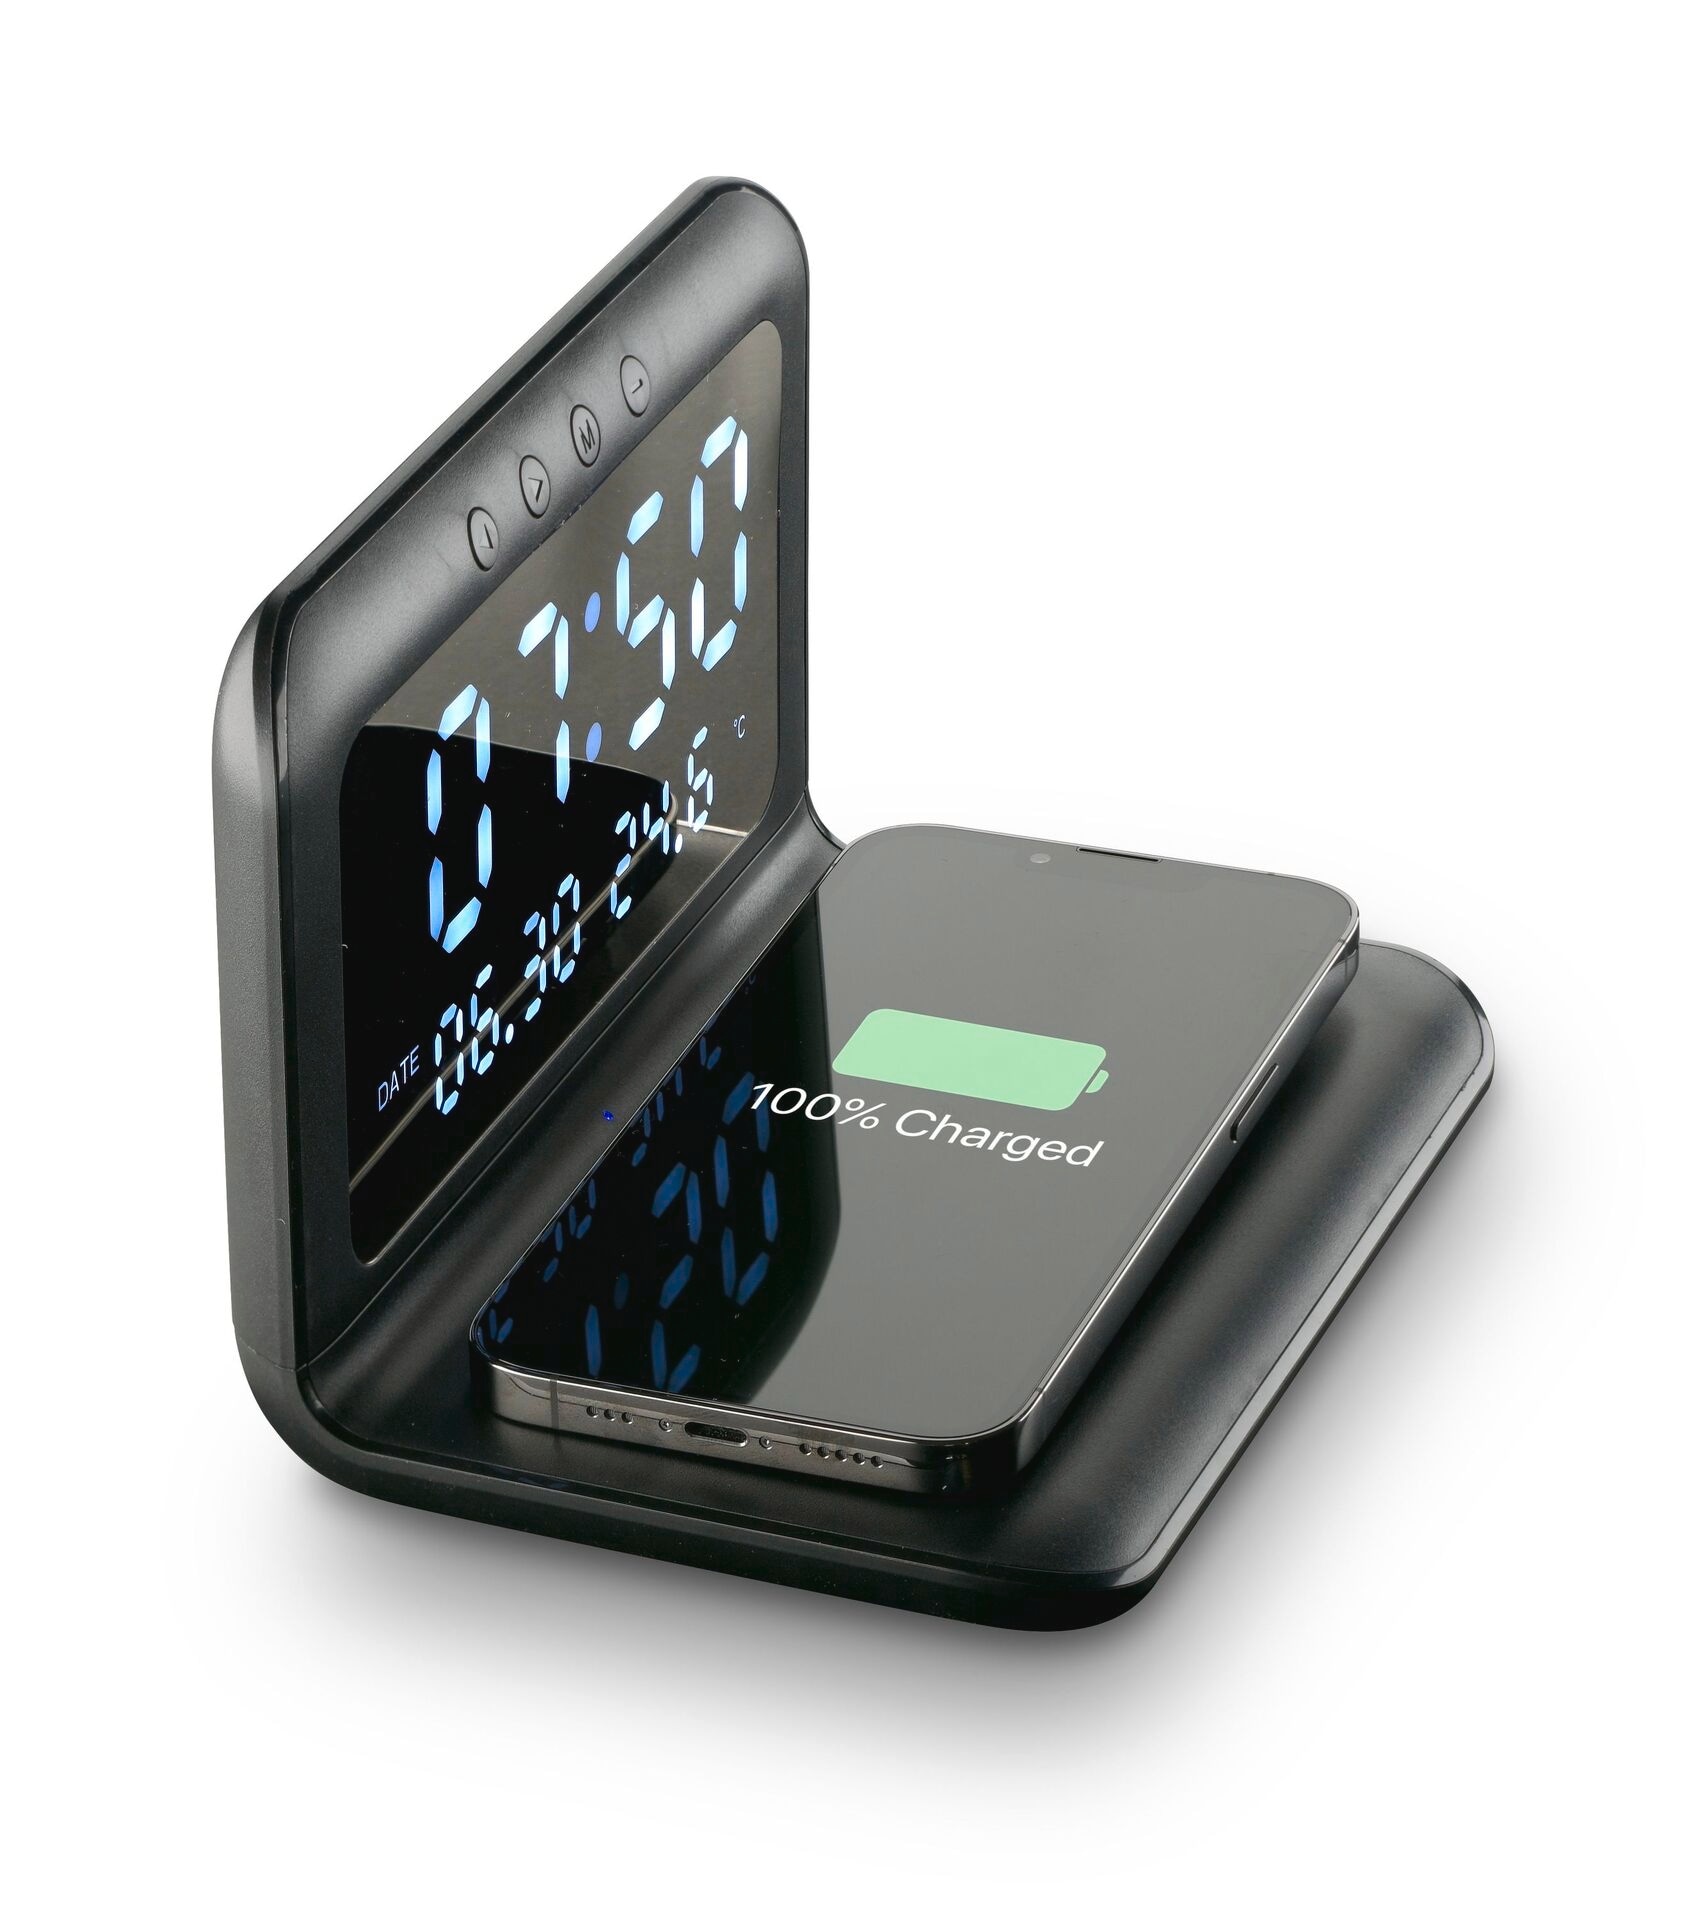 Cellularline Wireless Charger »Cellularline Wireless Charging Alarm Clock«